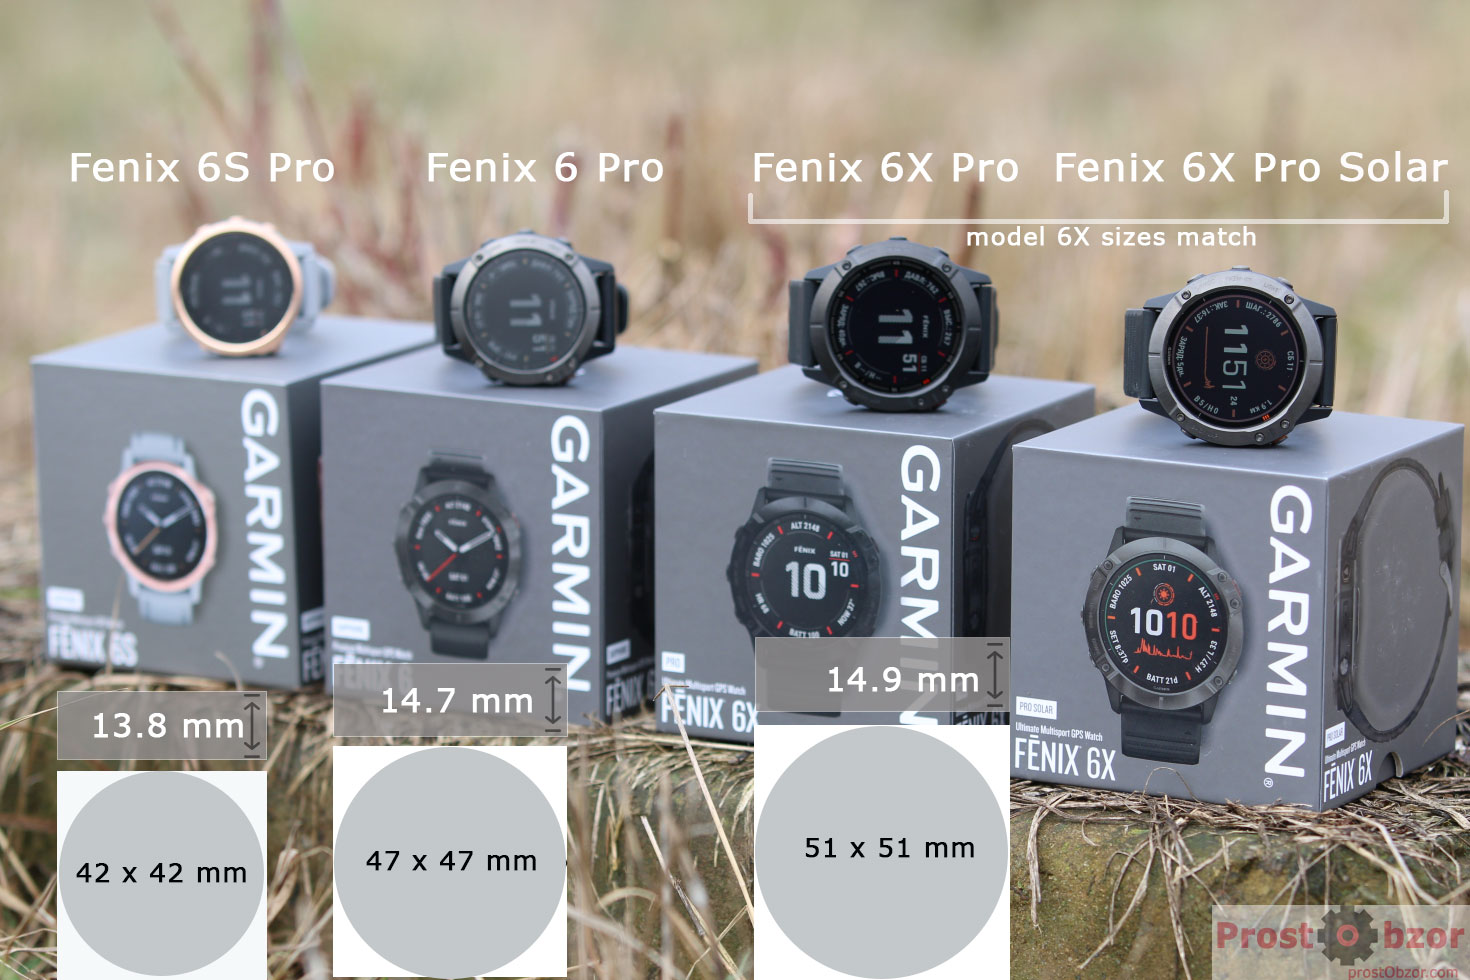 Why Garmin Fenix 6 makes the Difference